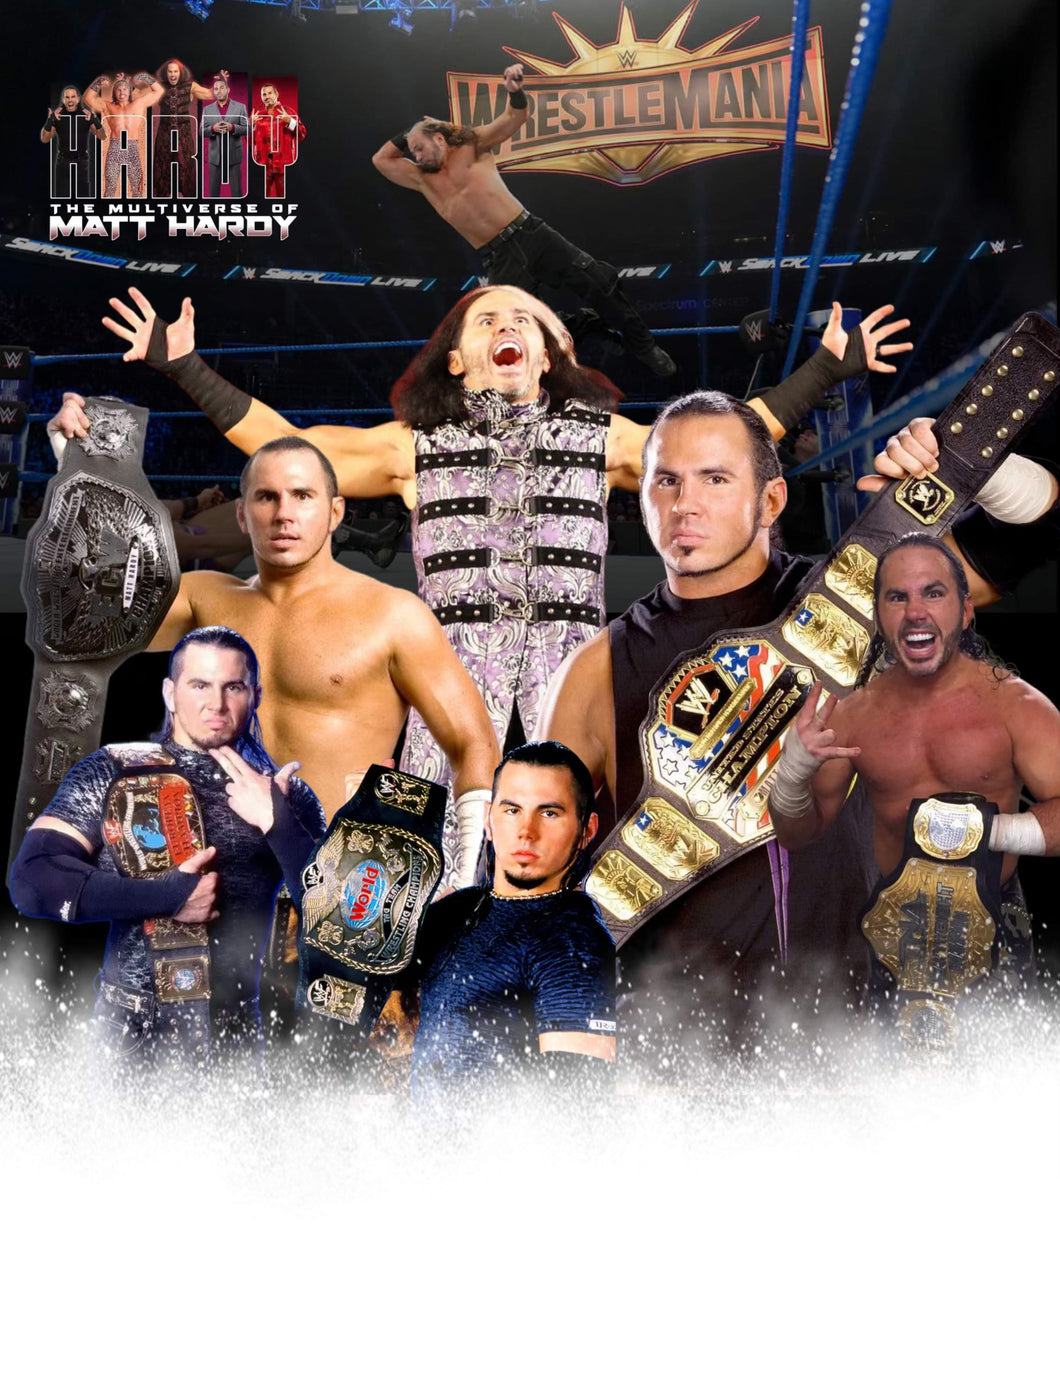 MATT HARDY PHOTO ONLY PRODUCT TO GET SIGNED